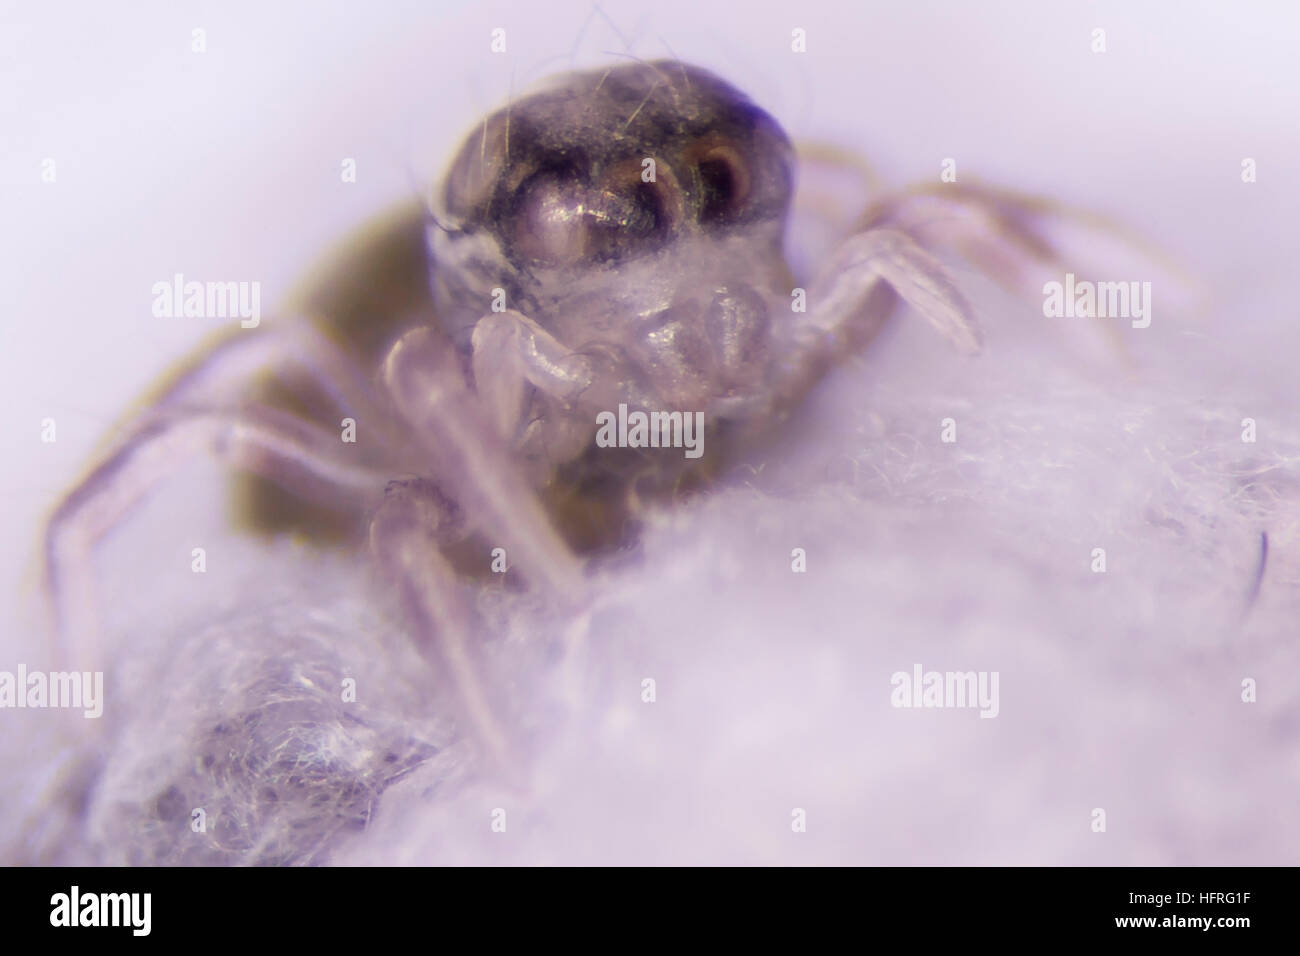 Habronattus oregonensis hatchling, still clinging to the surface of the egg sac. Photographed on a white background. Stock Photo